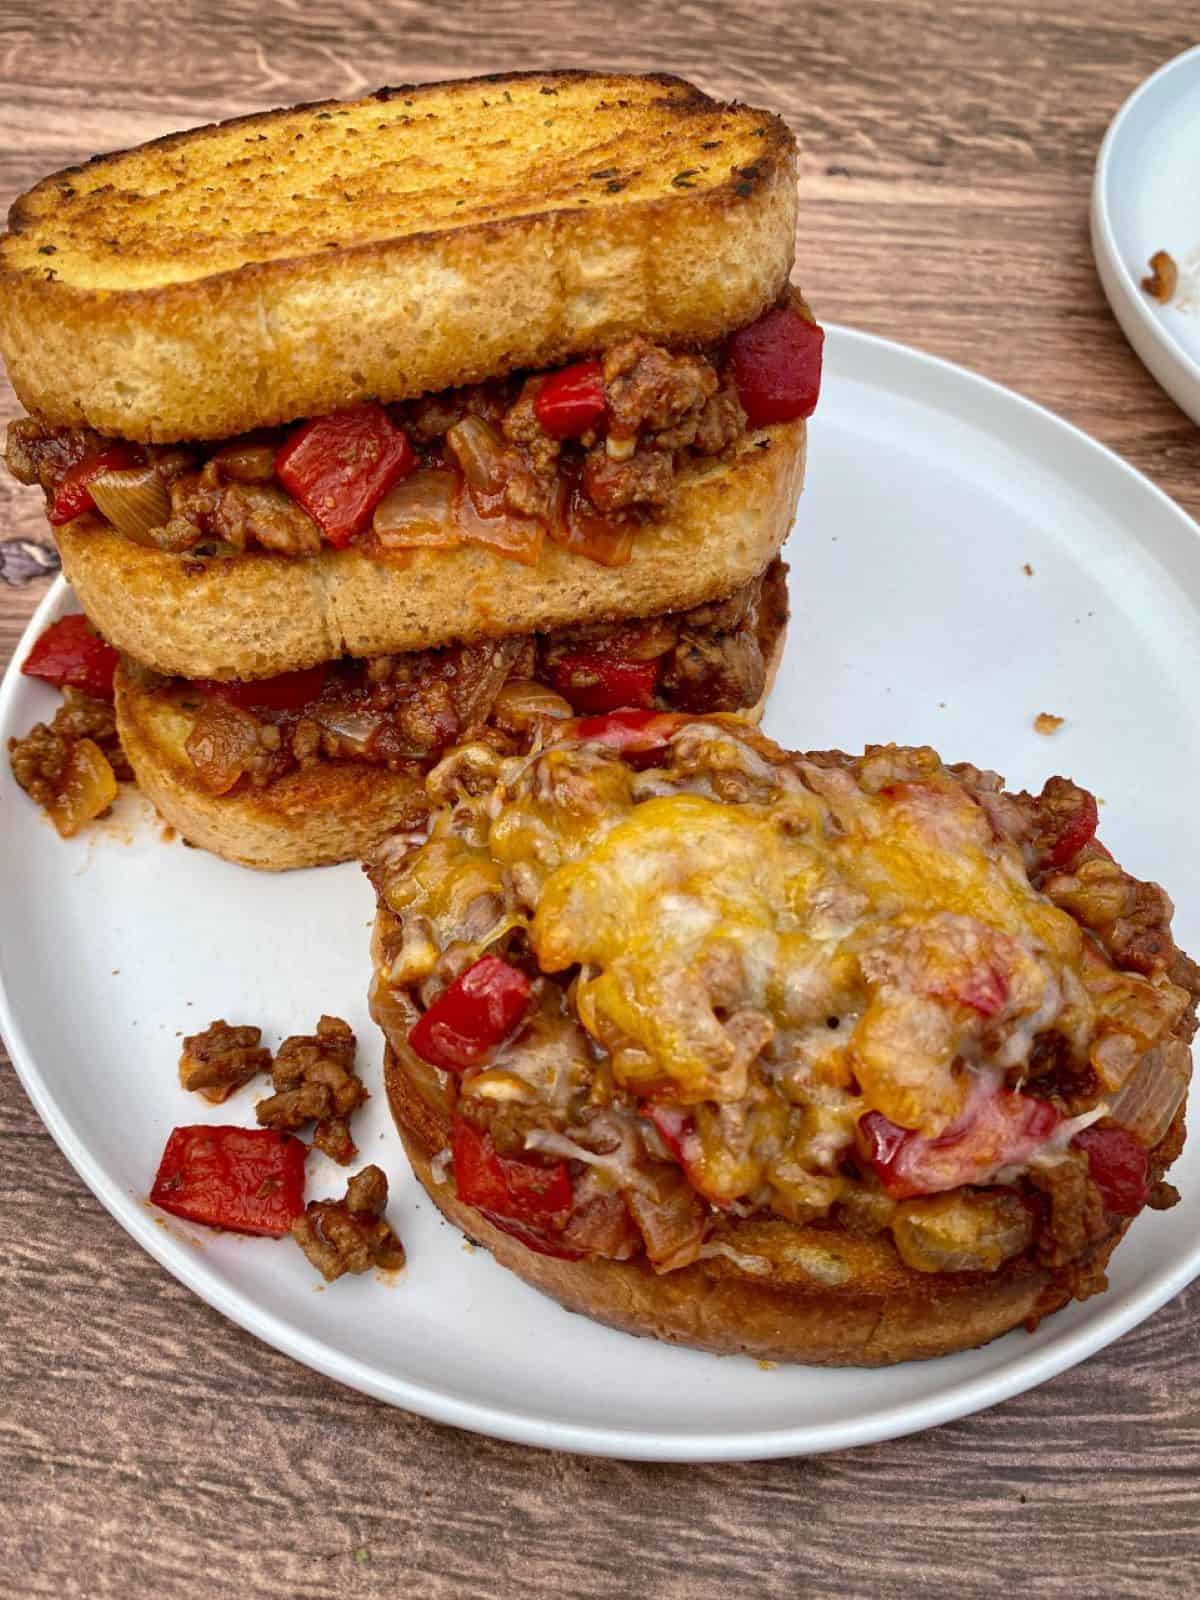 Open faced sloppy joes with cheese and a stacked sloppy joes on Texas toast. Both sloppy joes sandwiches are on a white plate.